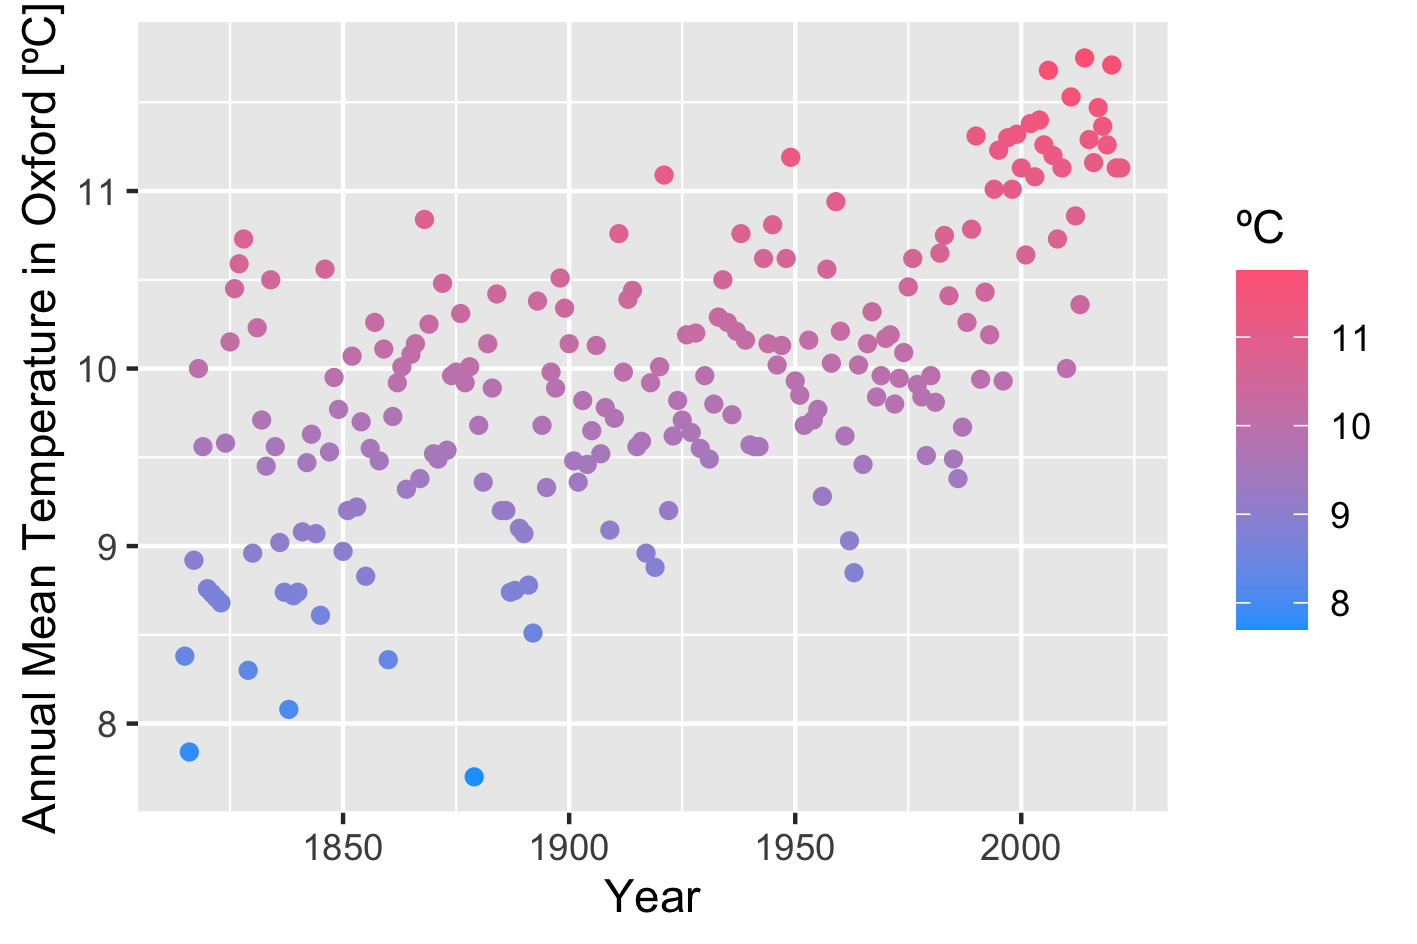 ggplot dot plot with customized colors